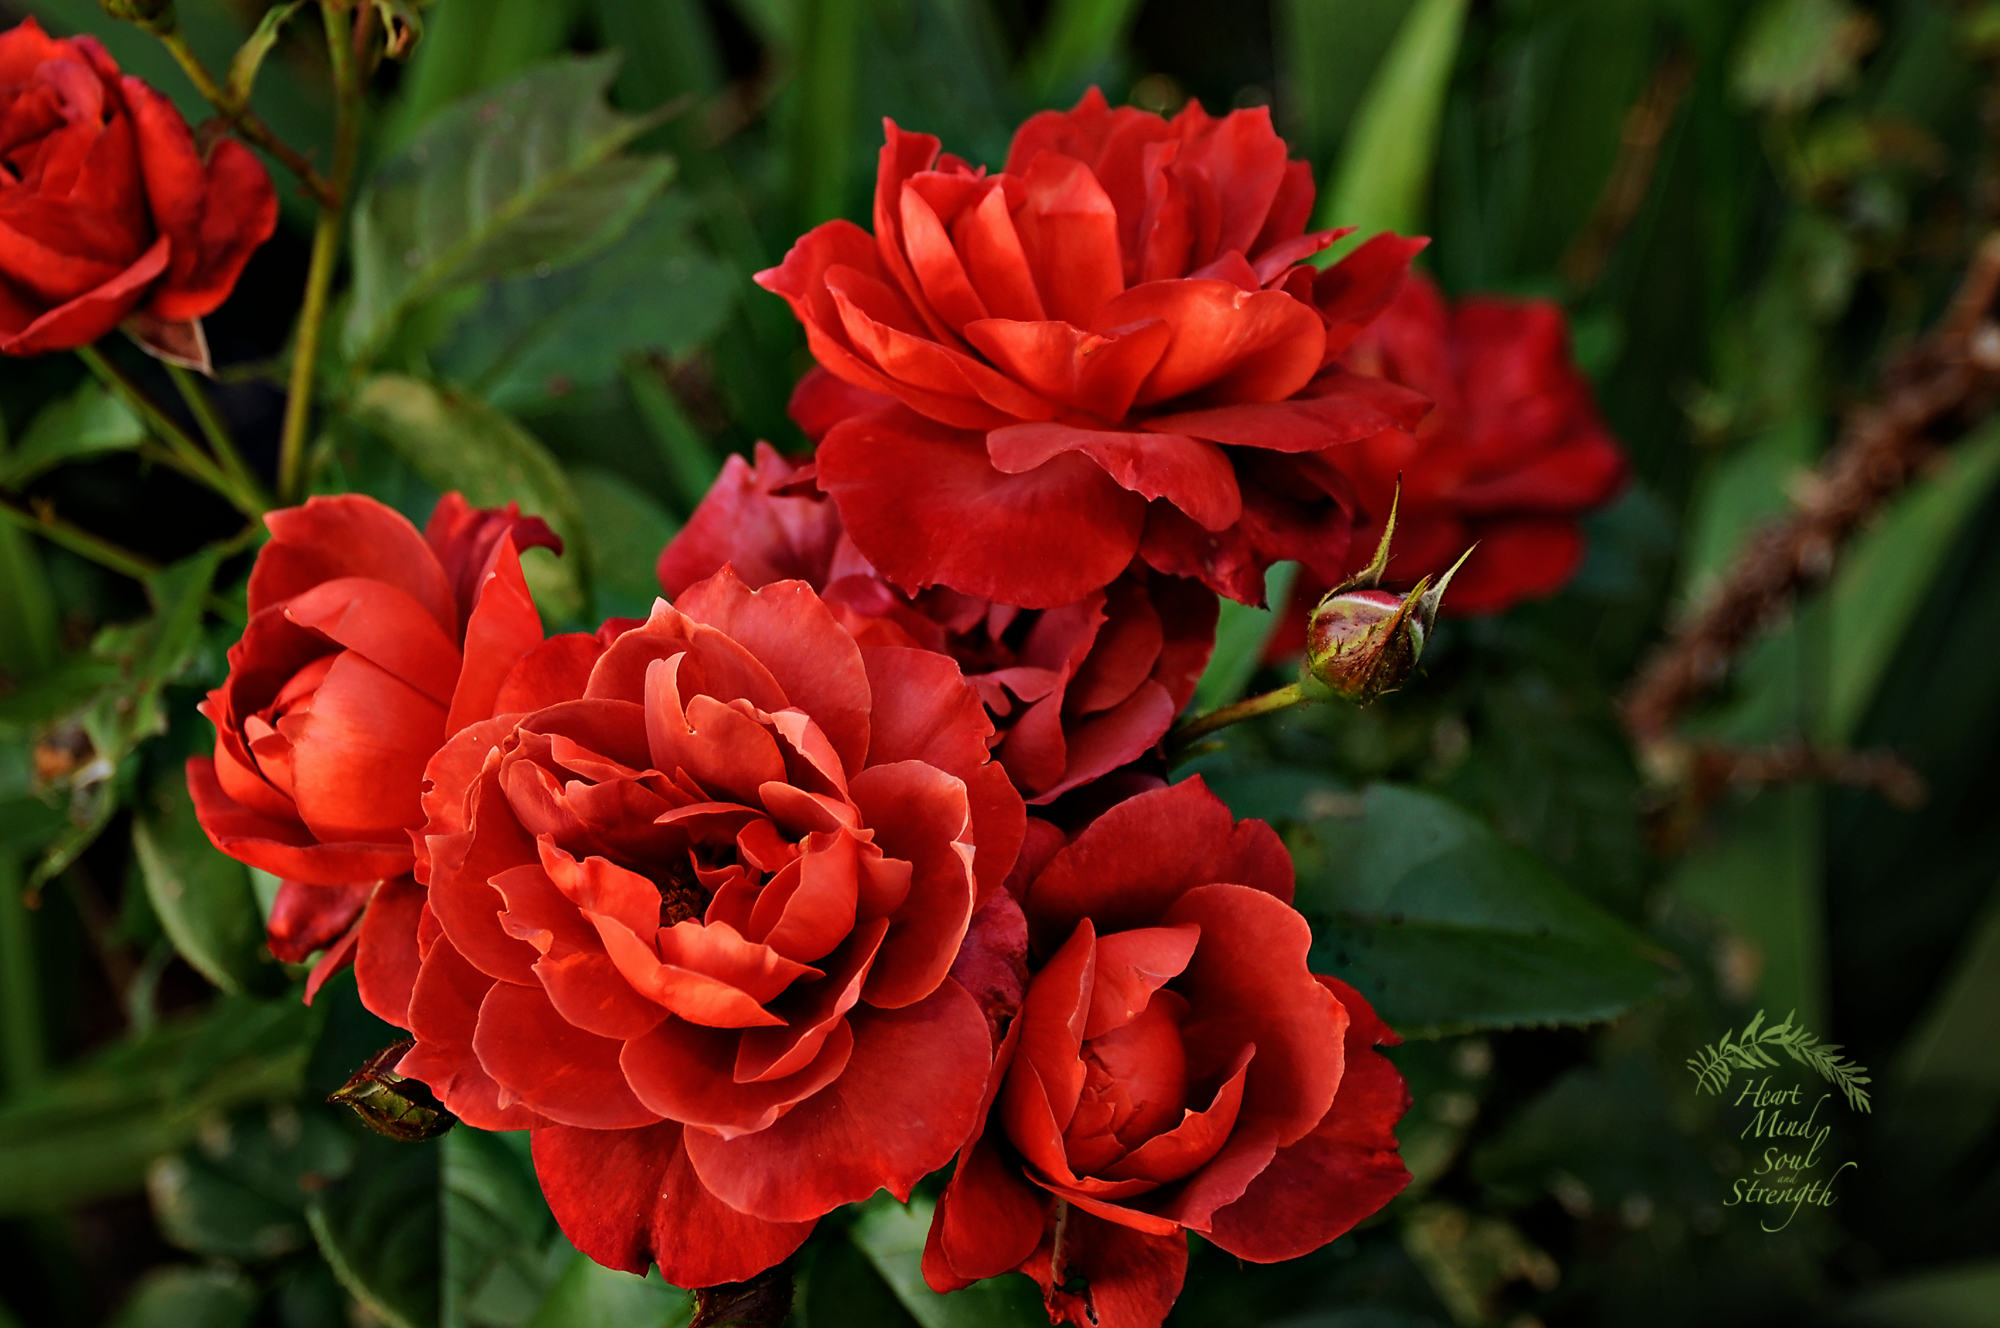 Red-Roses